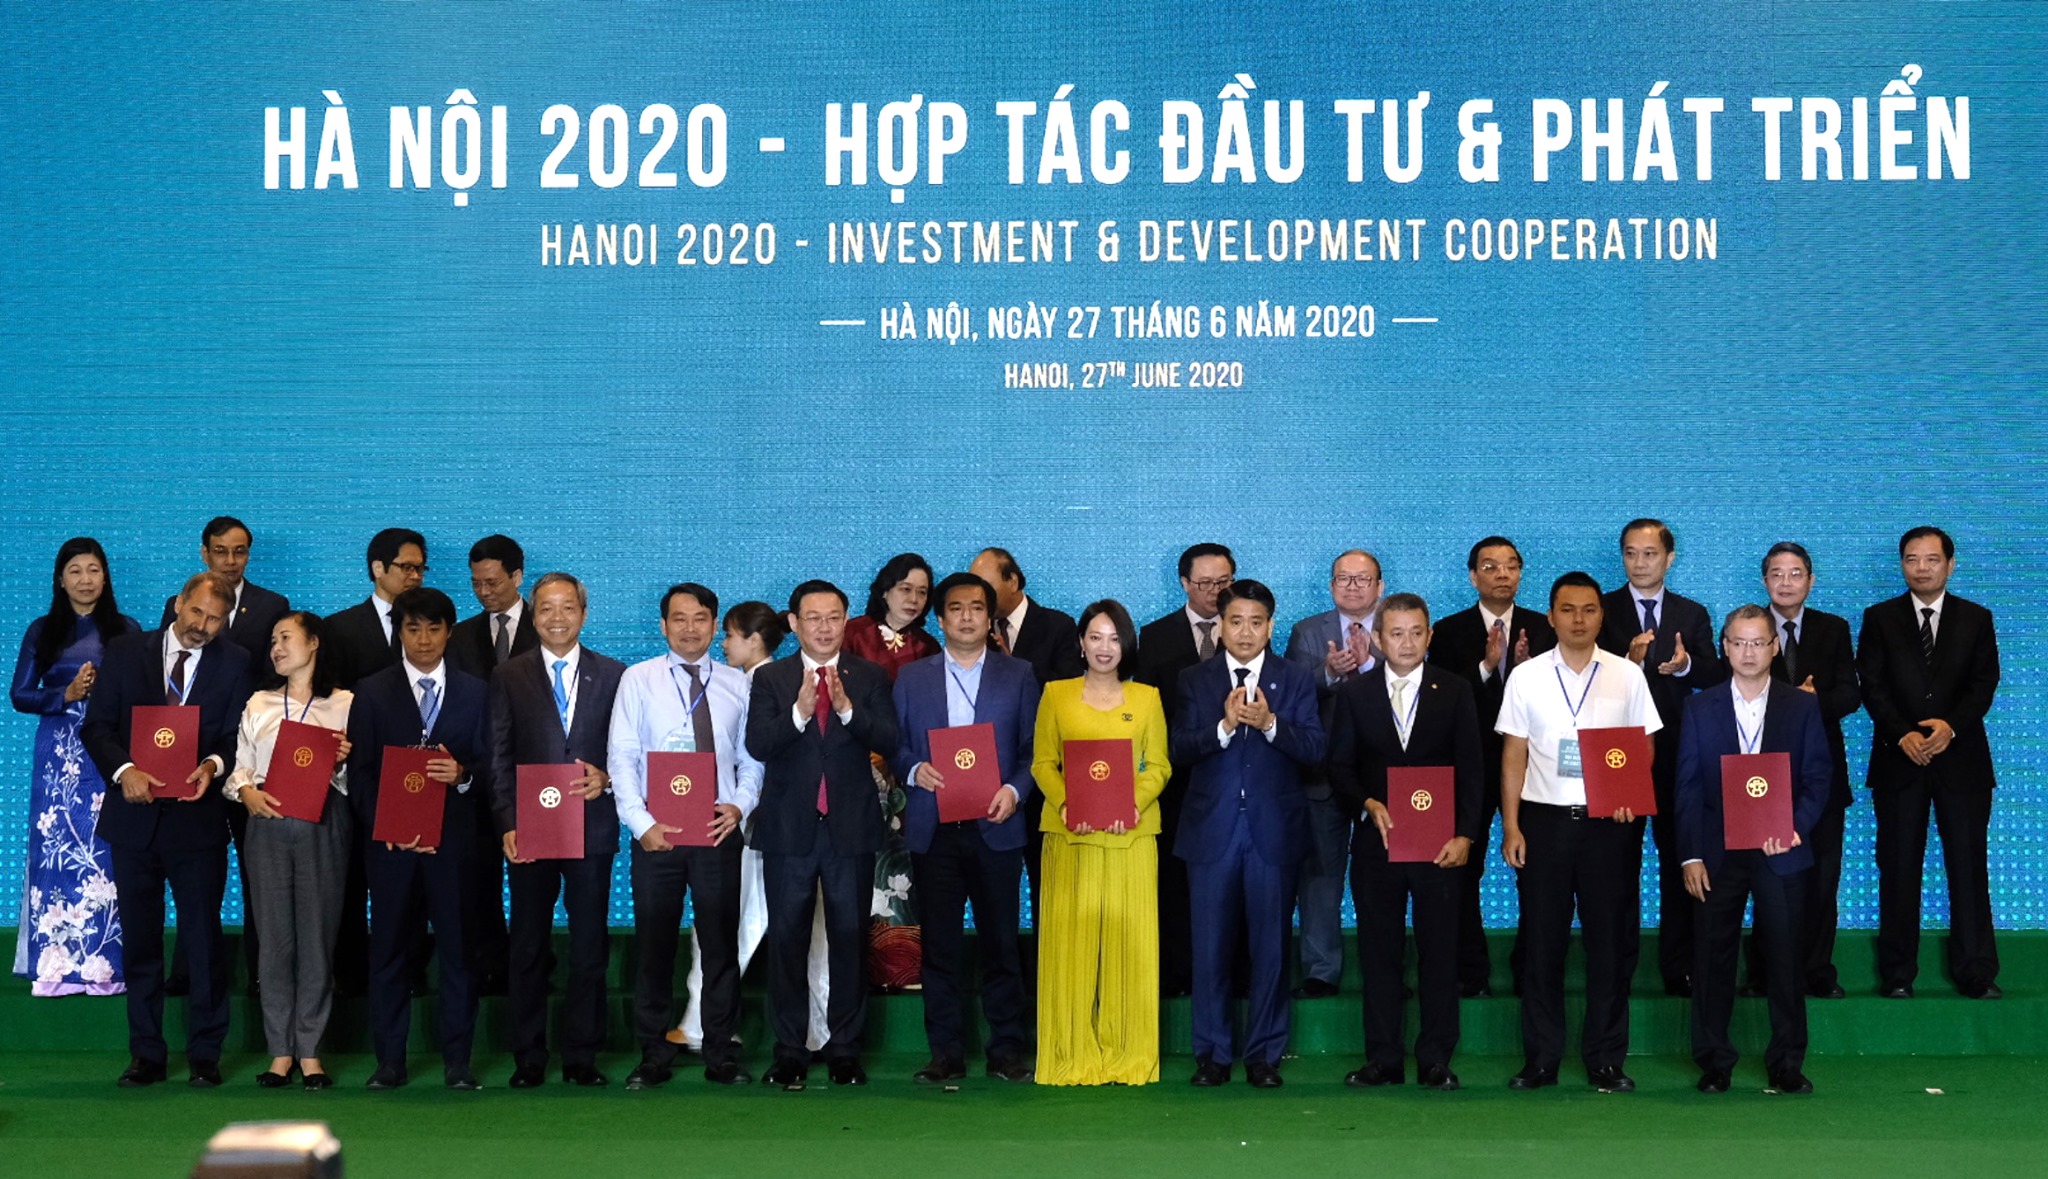 Hanoi People's Committee and 5 IT corporations sign memorandum of understanding on investment cooperation in telecommunication